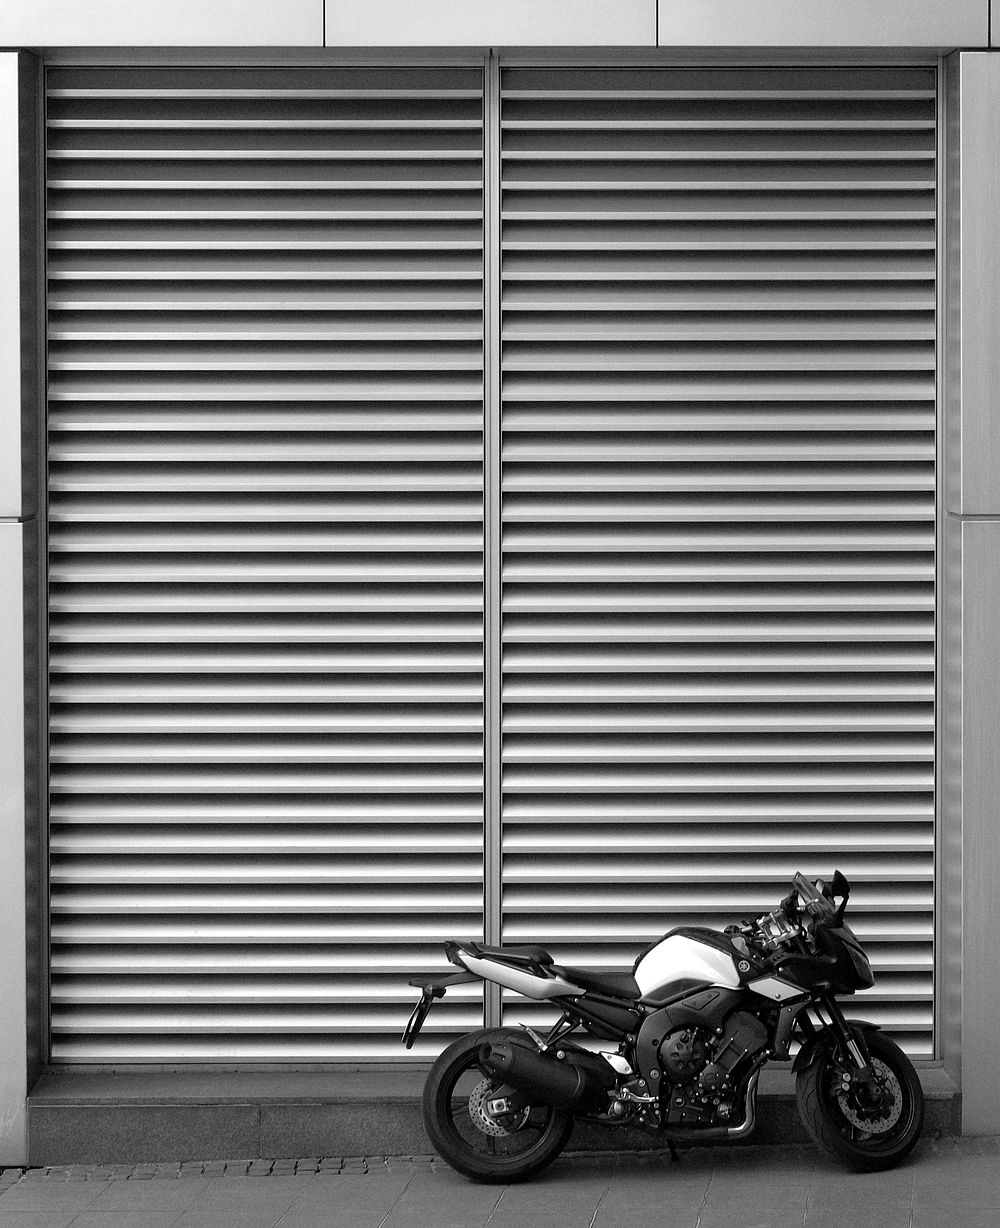 Black and white shot of motorbike parked in front of storefront shutters. Original public domain image from Wikimedia Commons